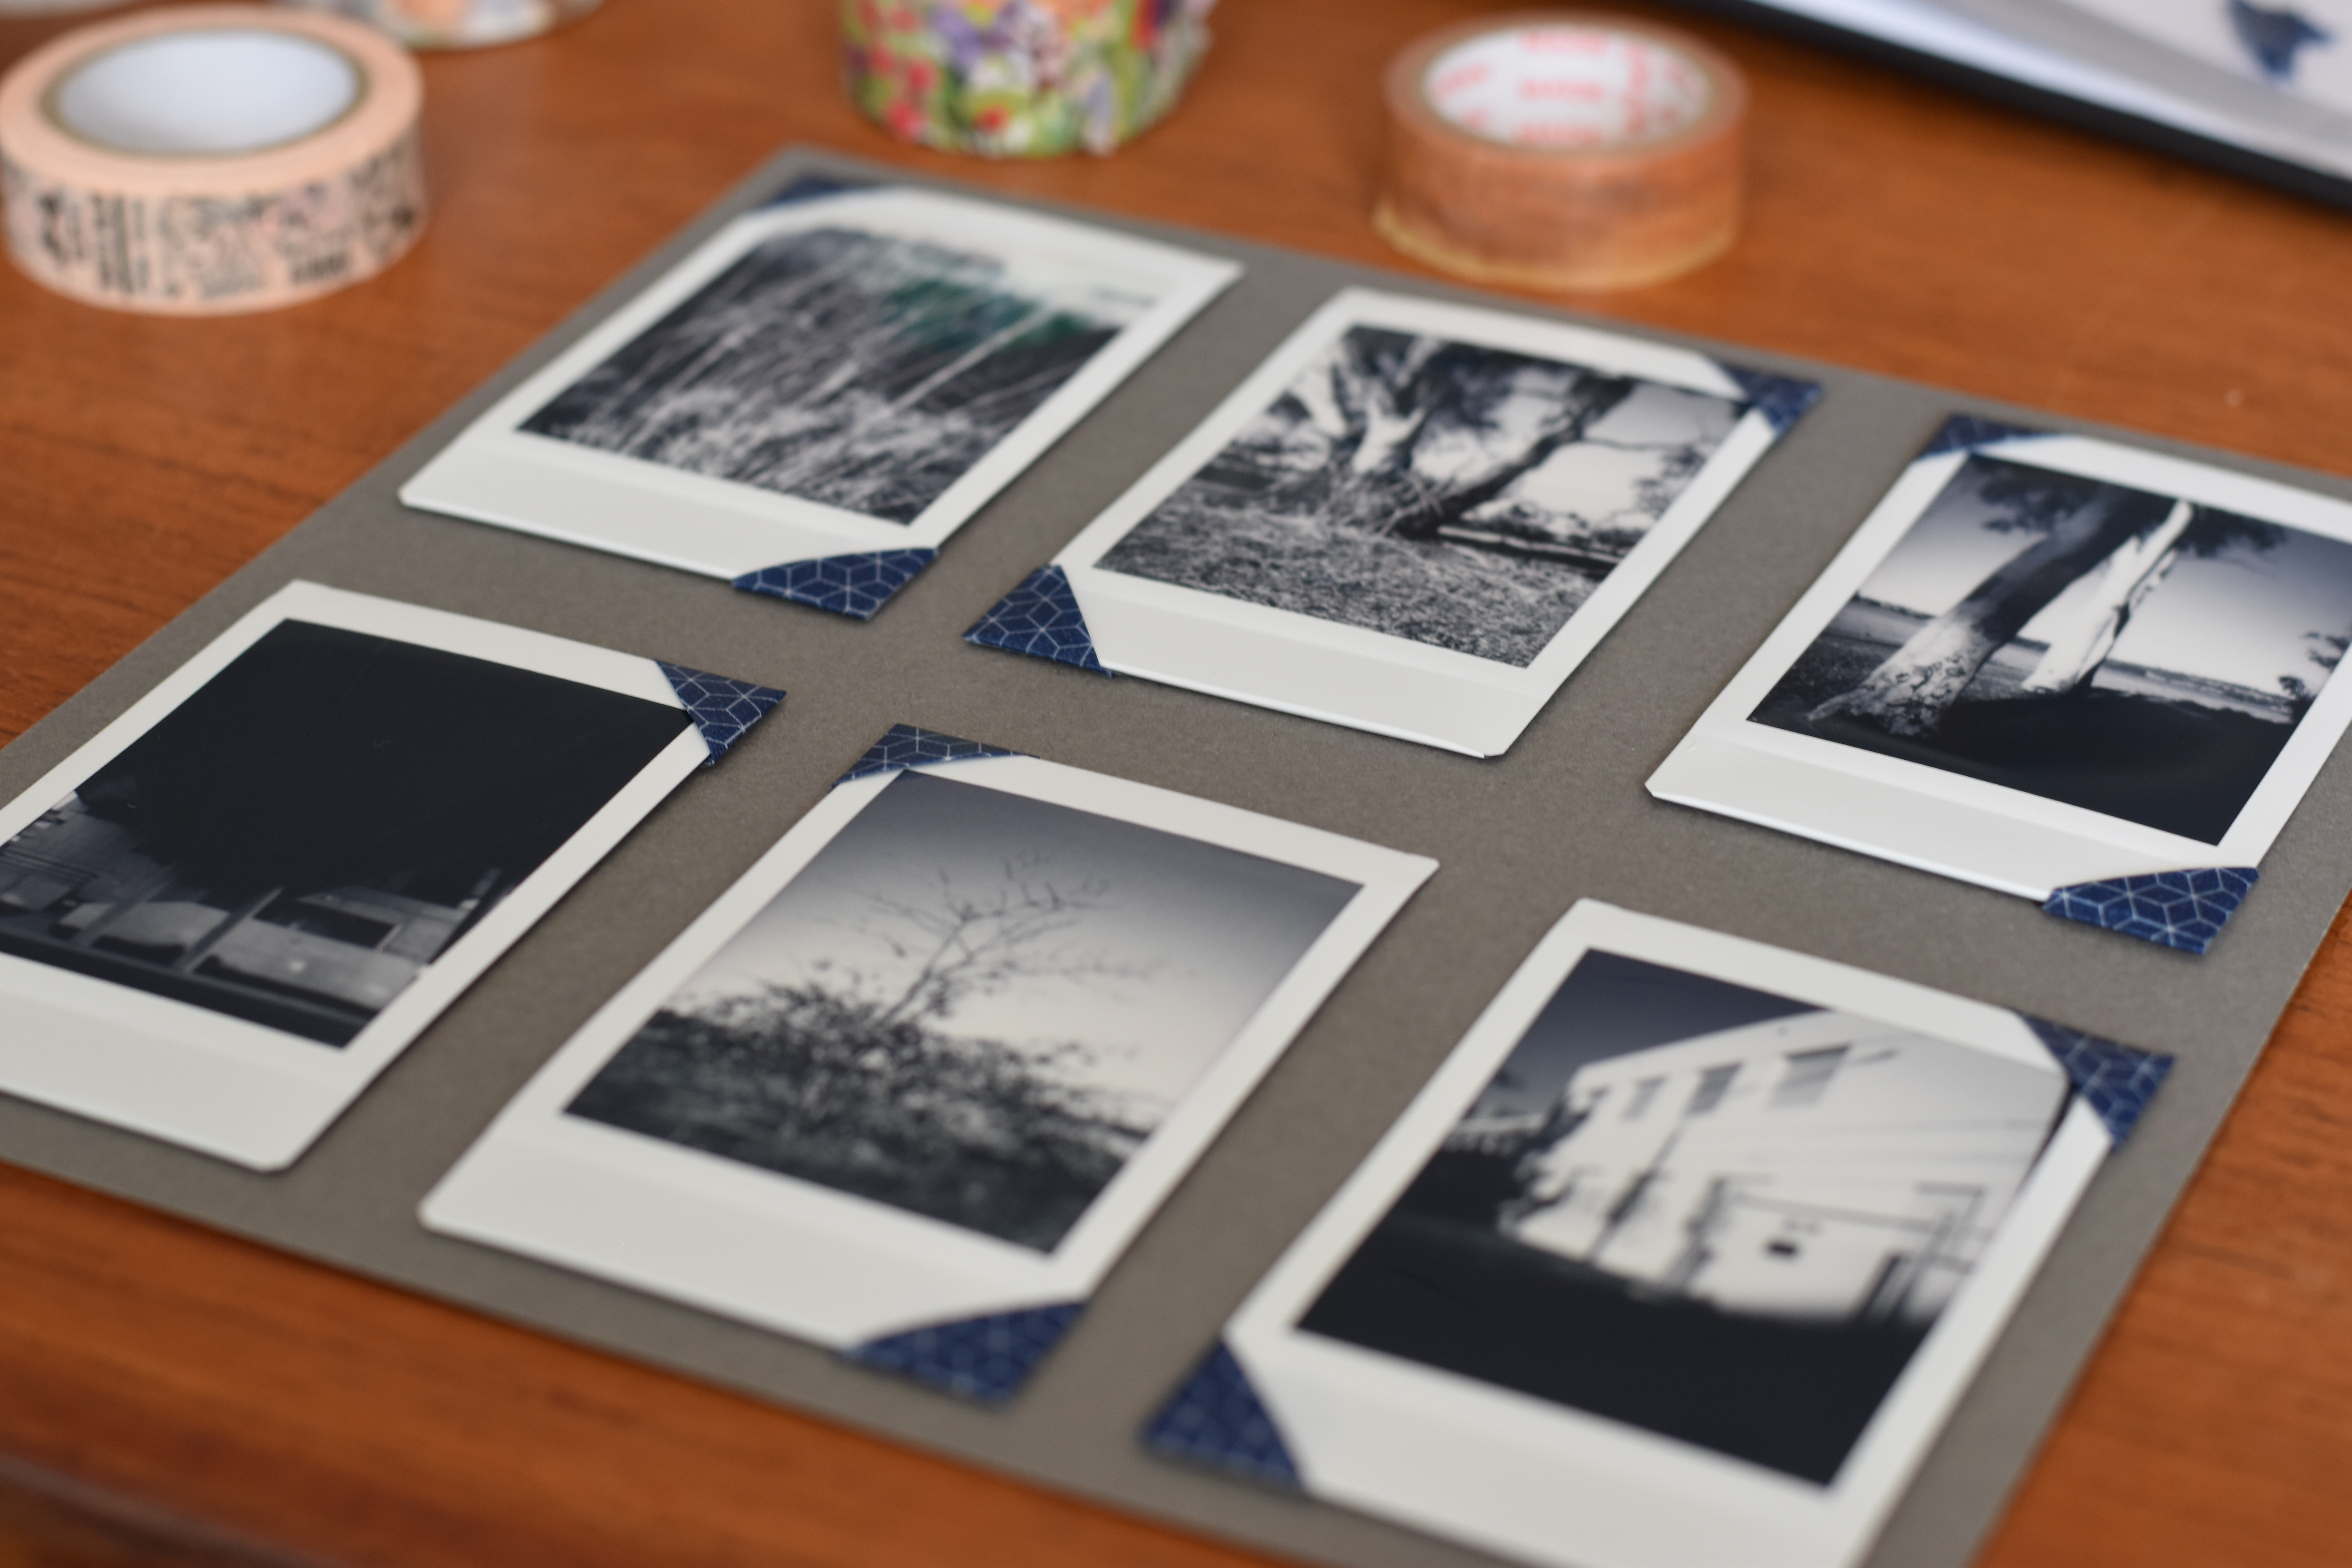 A page from a photo album. All six photos are held in with washi tape photo corners